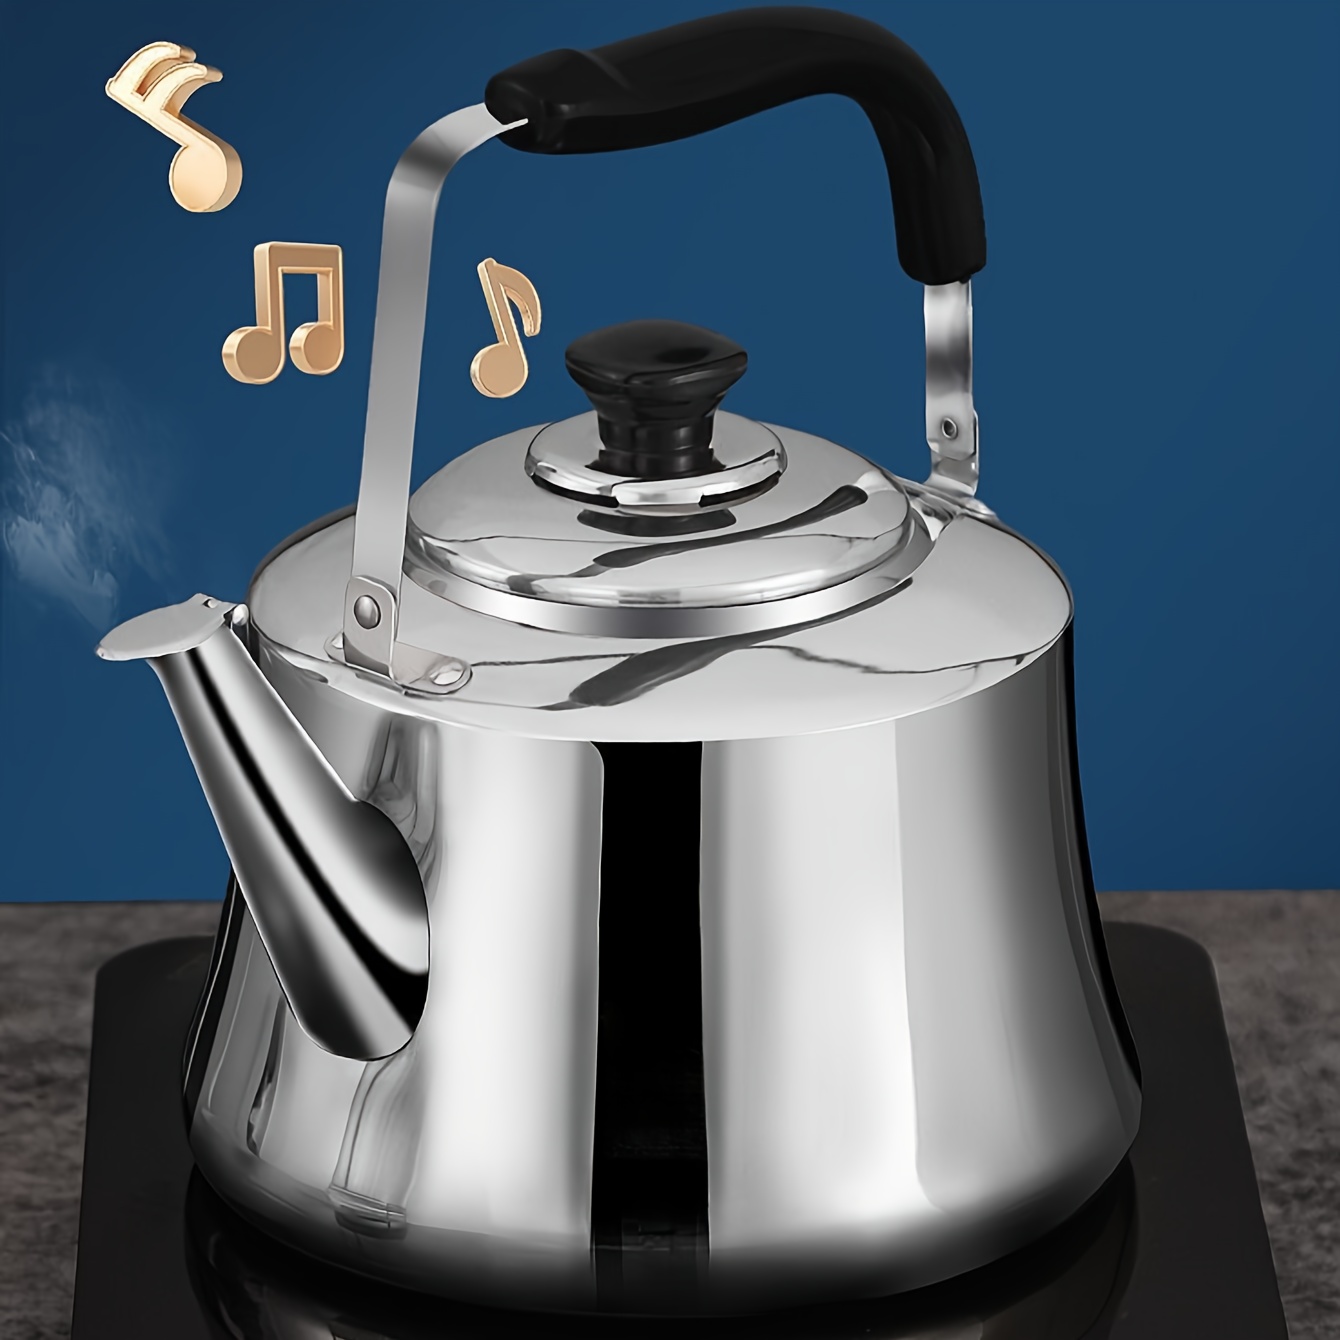 Whistle Tea Kettle For Stove Top, Stainless Steel Large Capacity